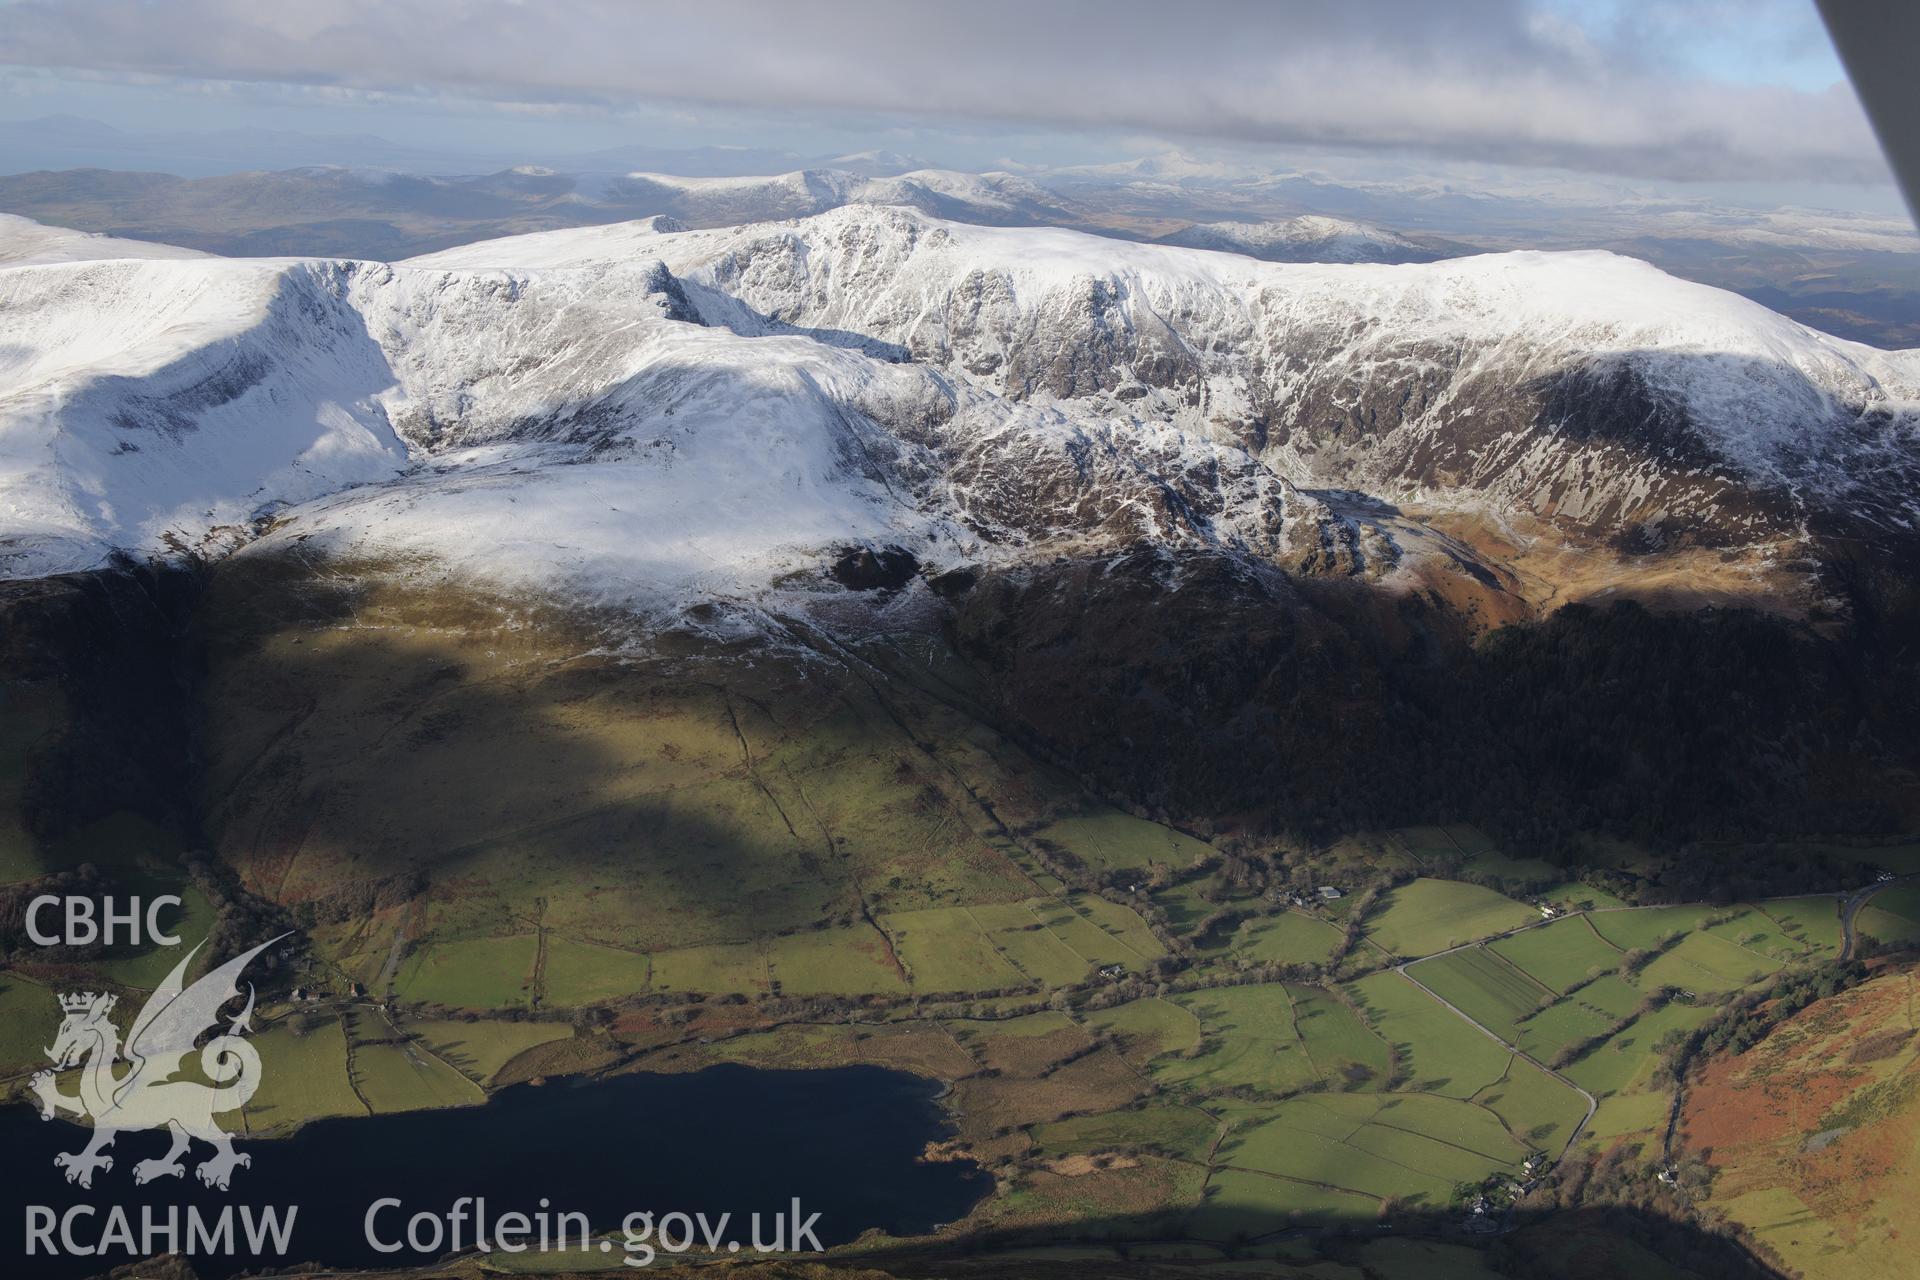 The snow-capped Cadair Idris, Penygadair Summit and Tal-y-Llyn lake, near Dolgellau. Oblique aerial photograph taken during the Royal Commission's programme of archaeological aerial reconnaissance by Toby Driver on 4th February 2015.